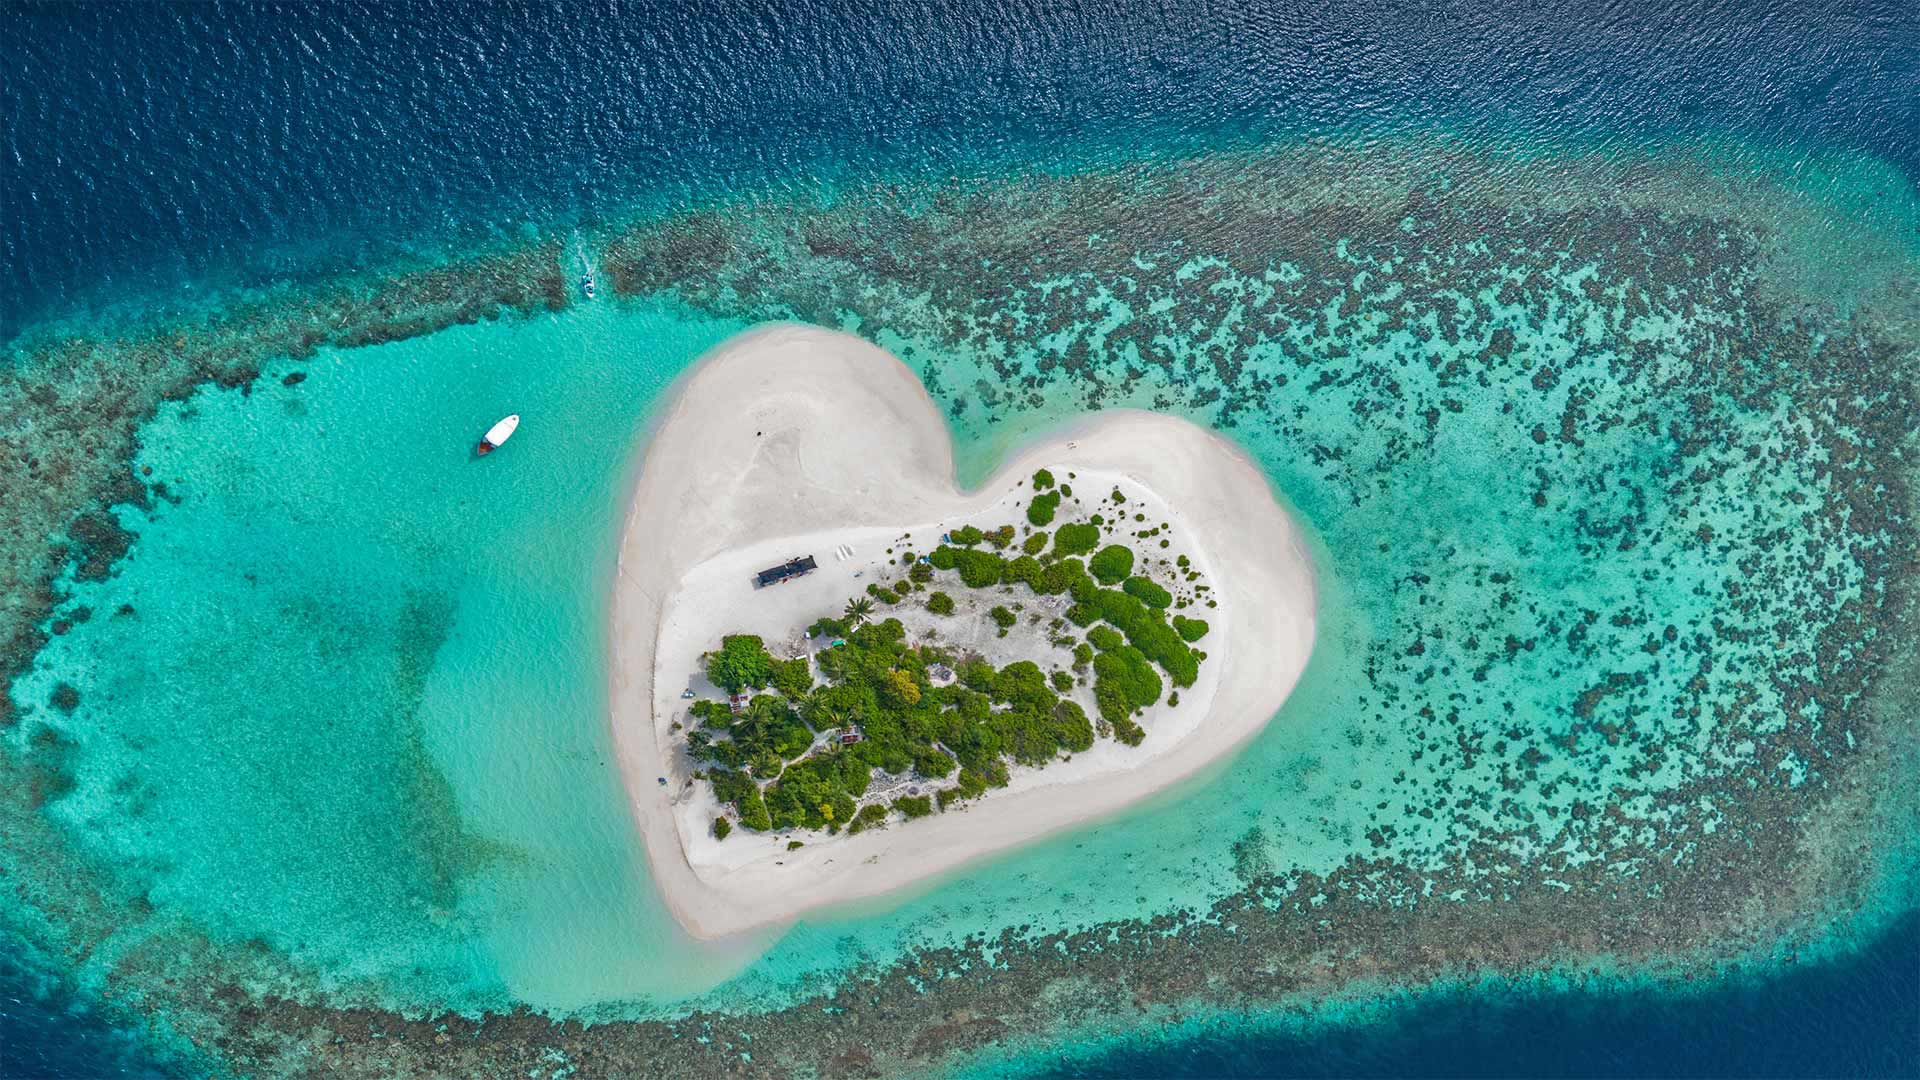 Heart-shaped island with sandy beach, offshore coral reef, Indian Ocean, Maldives - Willyam Bradberry/Shutterstock)